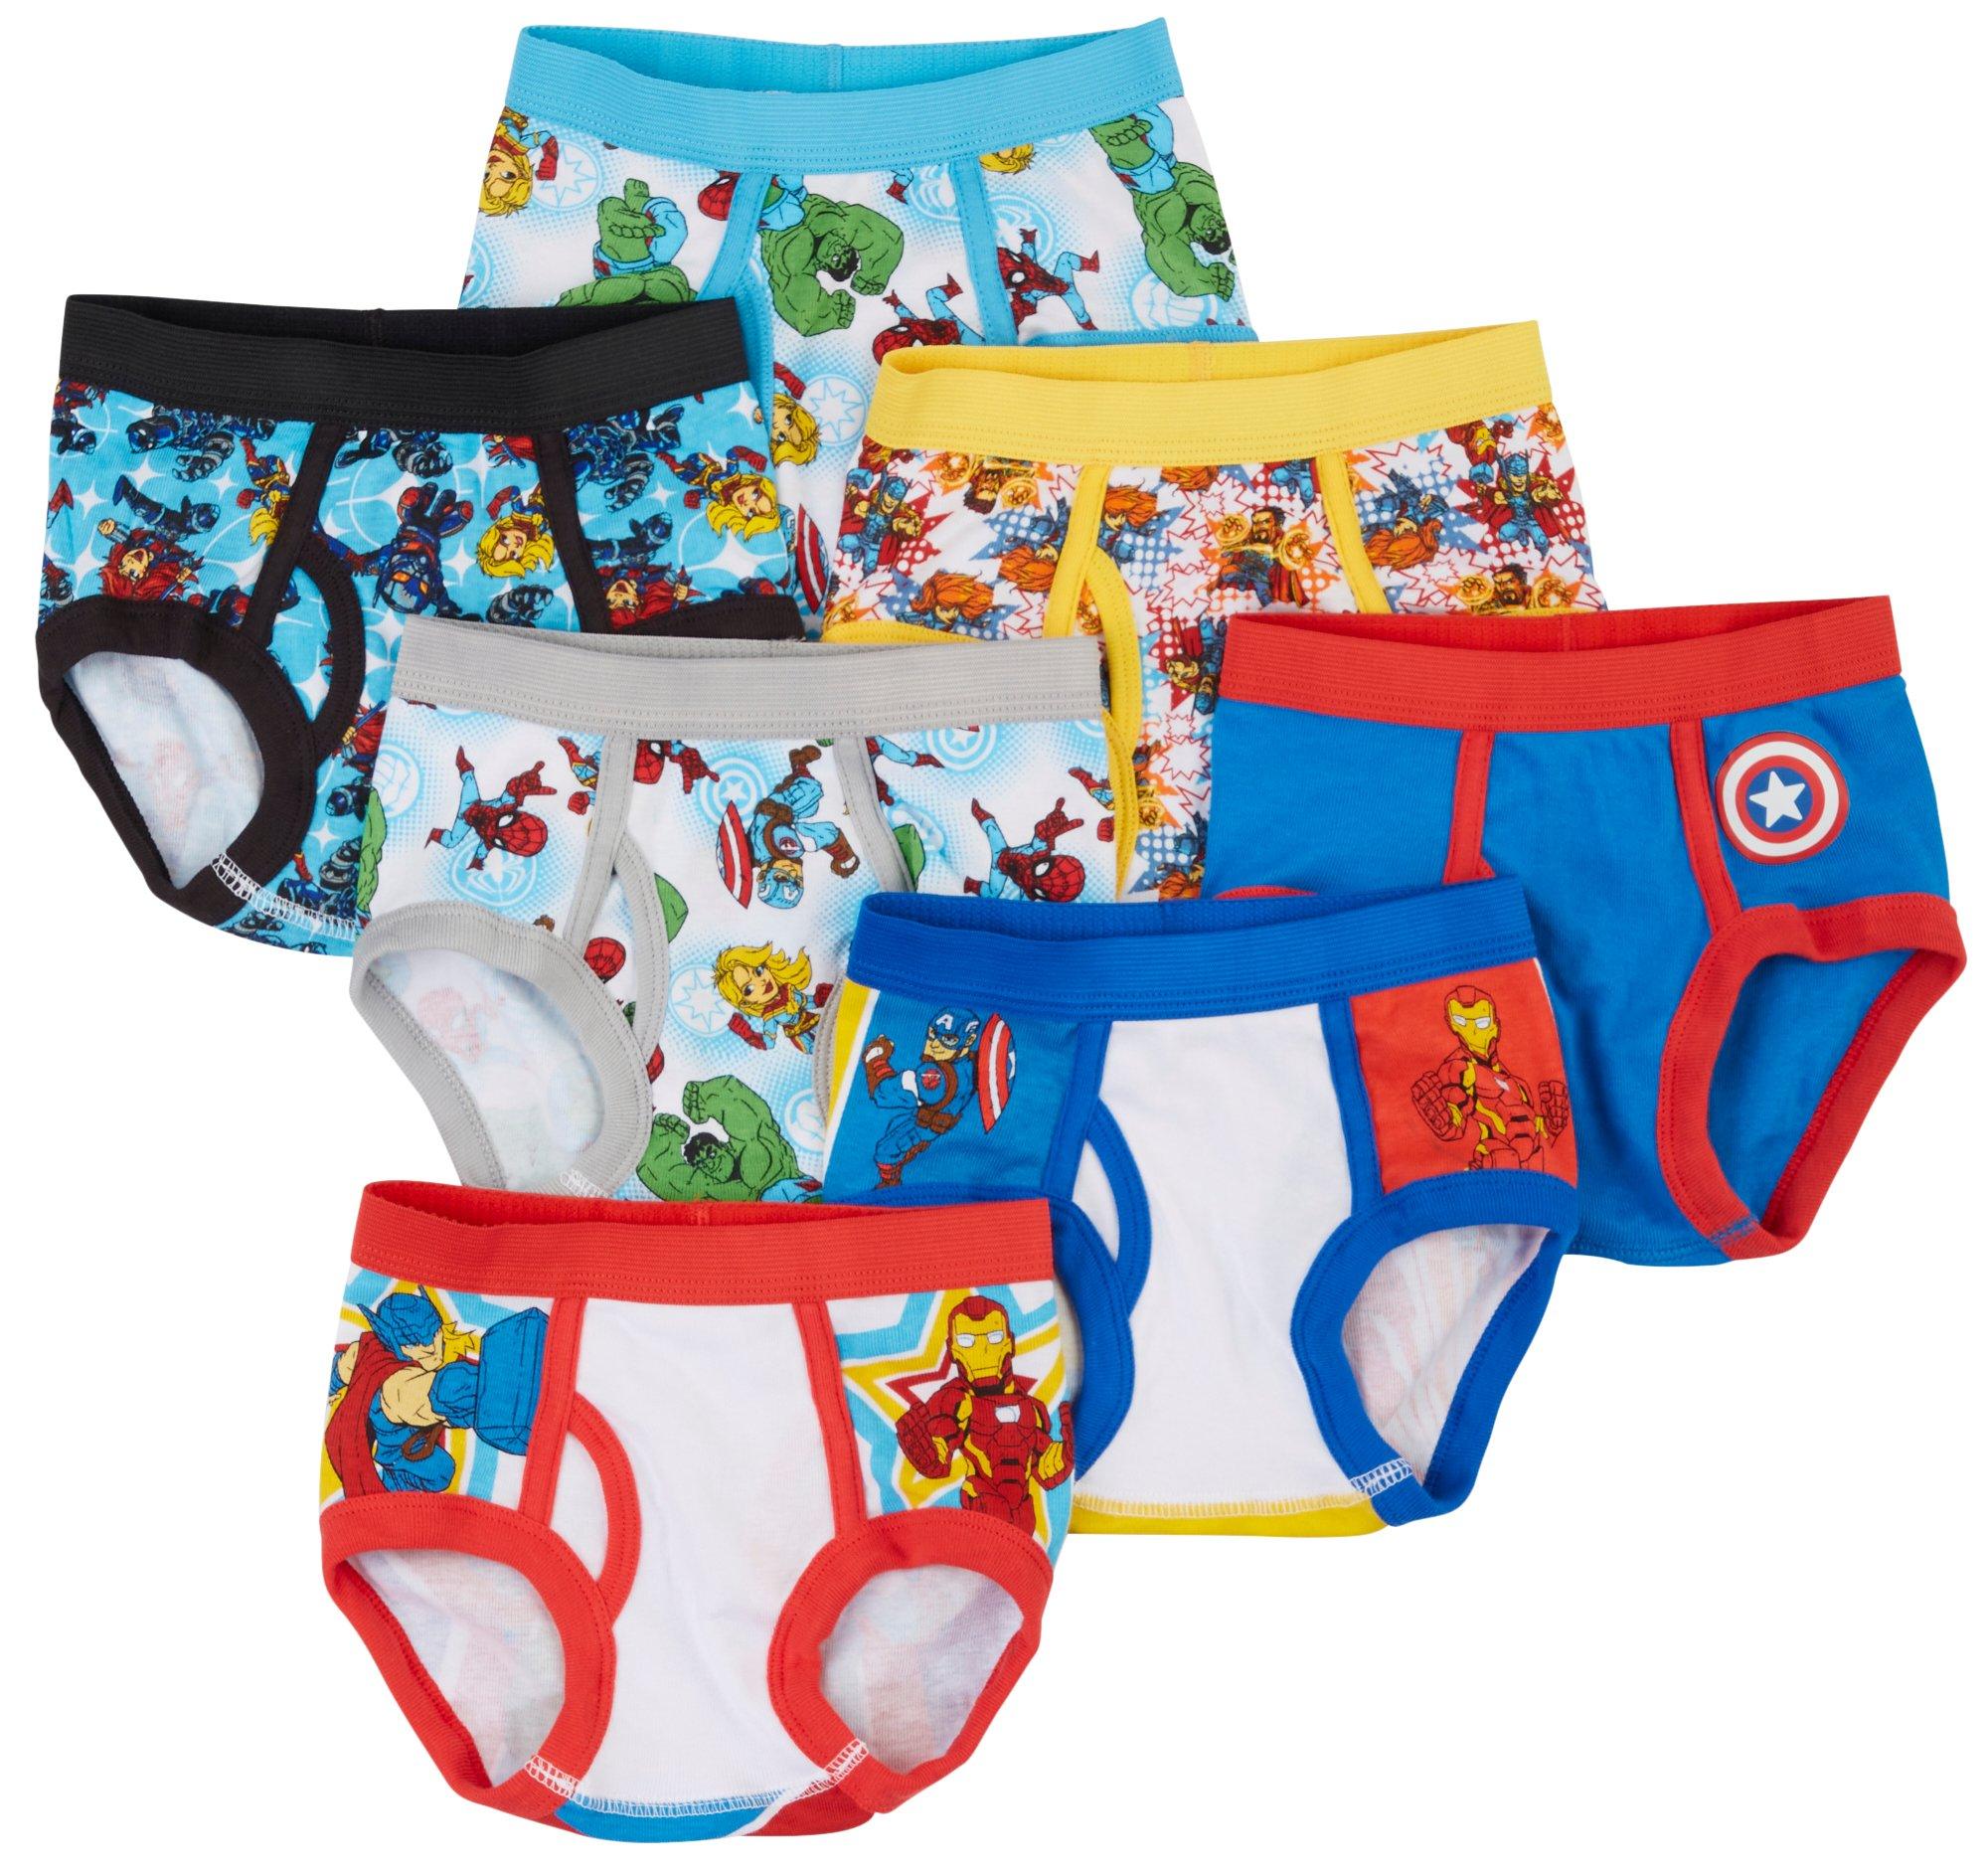  Disney Boys' Mickey Mouse 100% Combed Cotton Briefs Available  in Sizes 2/3t, 4T, 4, 6 and 8, 10-Pack, 18M: Clothing, Shoes & Jewelry